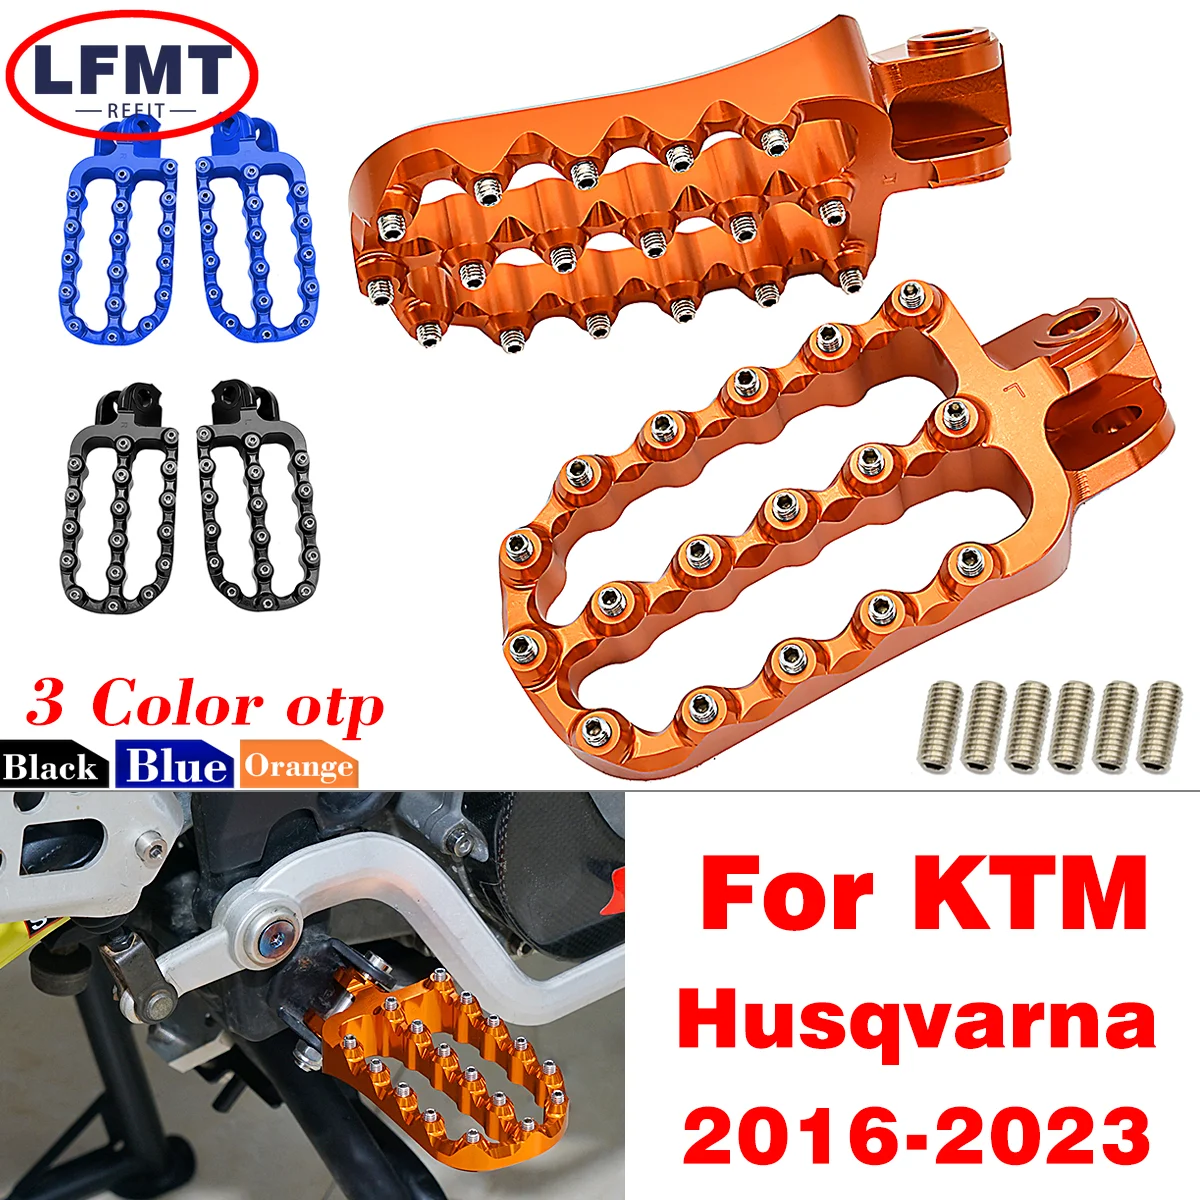 

Motorcycle Footboard foot treadle rest For KTM XC EXC EXC-F SX SX-F EXCF SXF 125-500 For Husqvarna TC FC TE FE TX FX 2005-2019